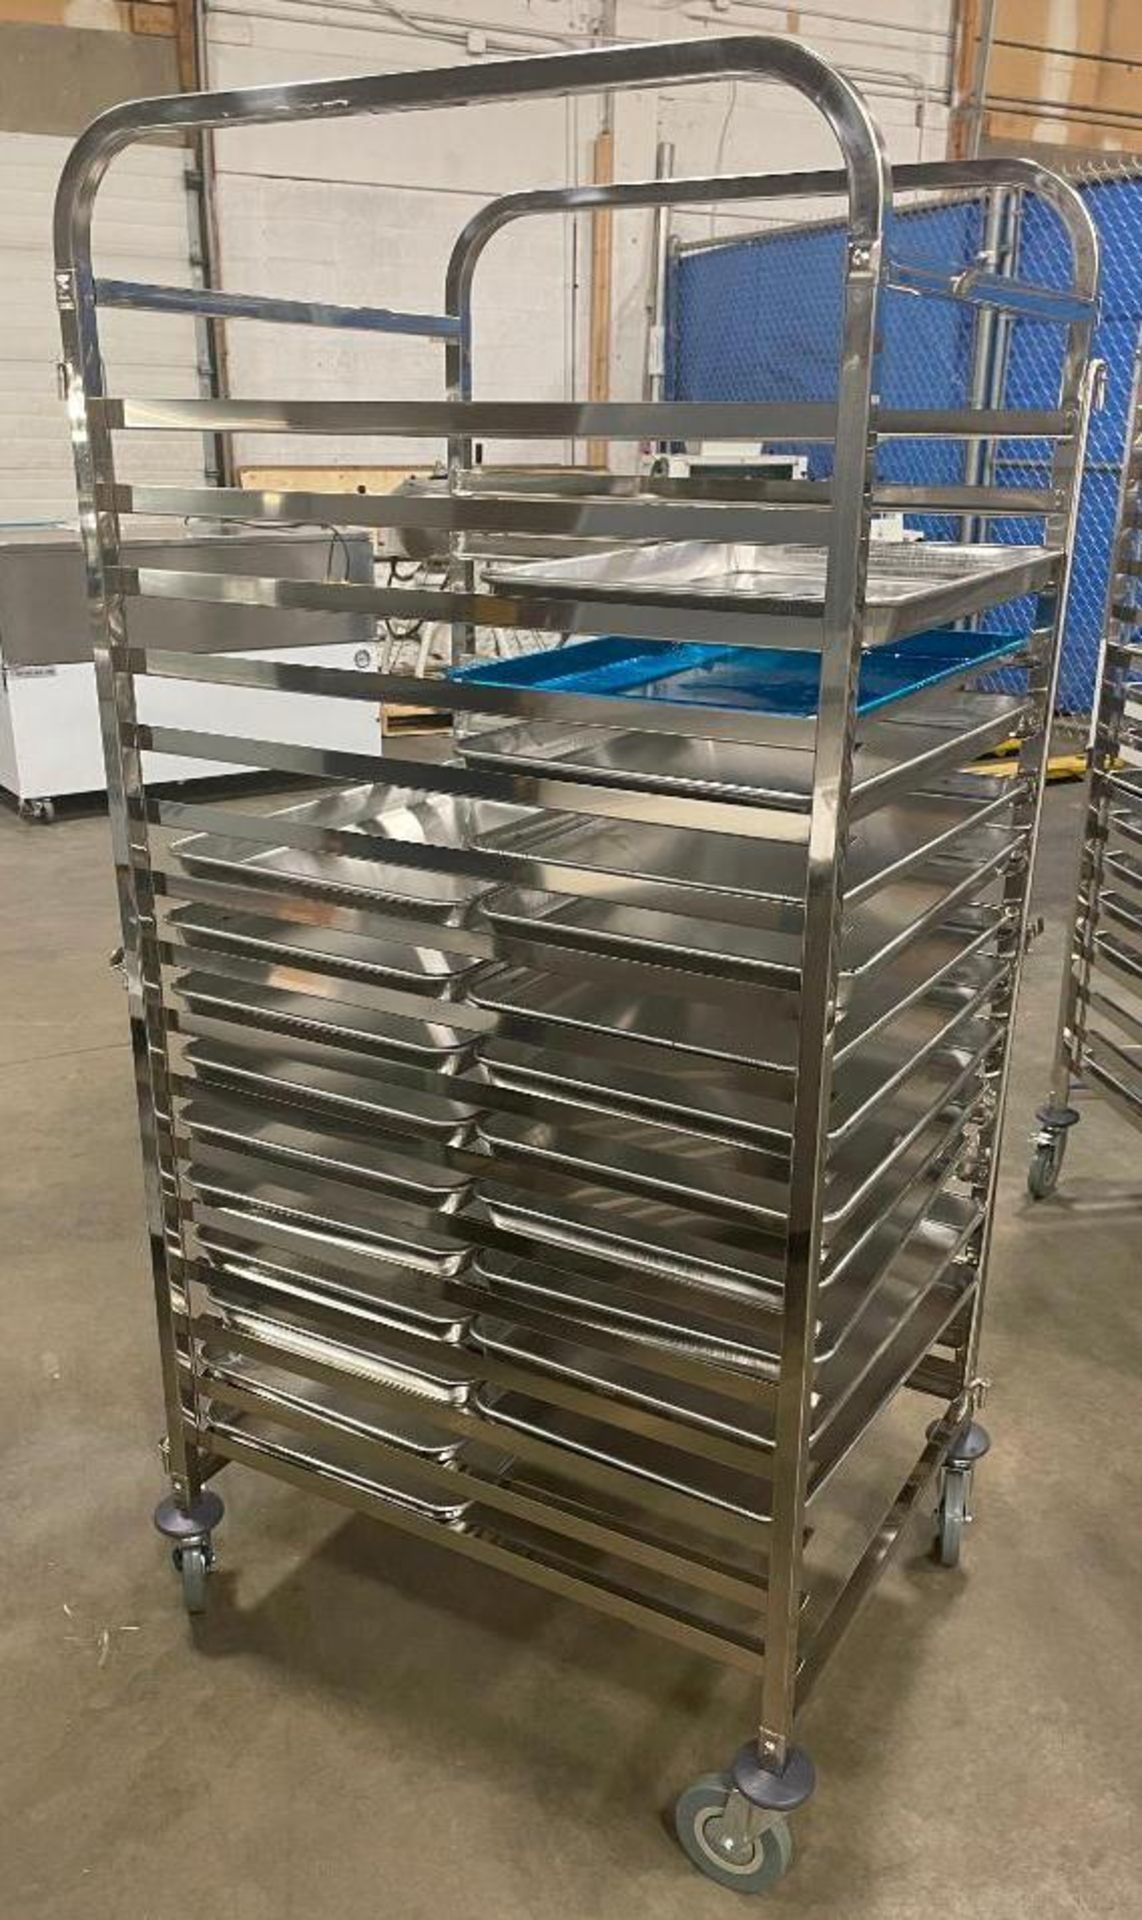 NEW STAINLESS STEEL 16-SLOT OVERSIZED BUN PAN RACK WITH PAN GUARD & (22) PANS - Image 5 of 8